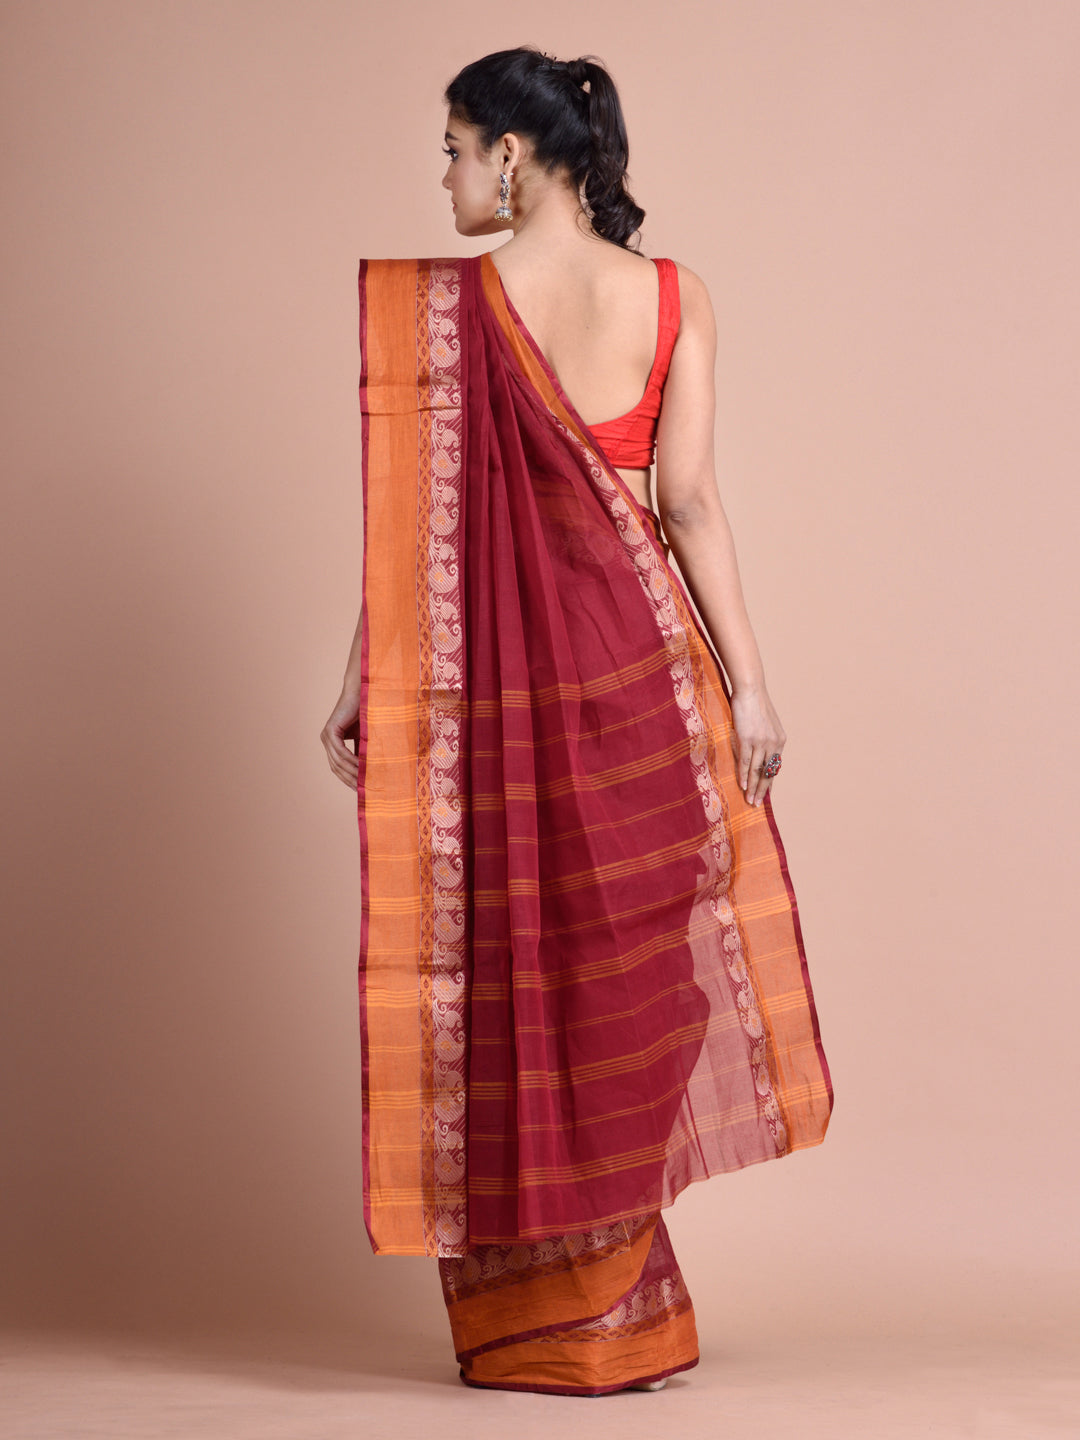 Women's Rust Red Tangail Taant saree With Paisley Designs - Sajasajo